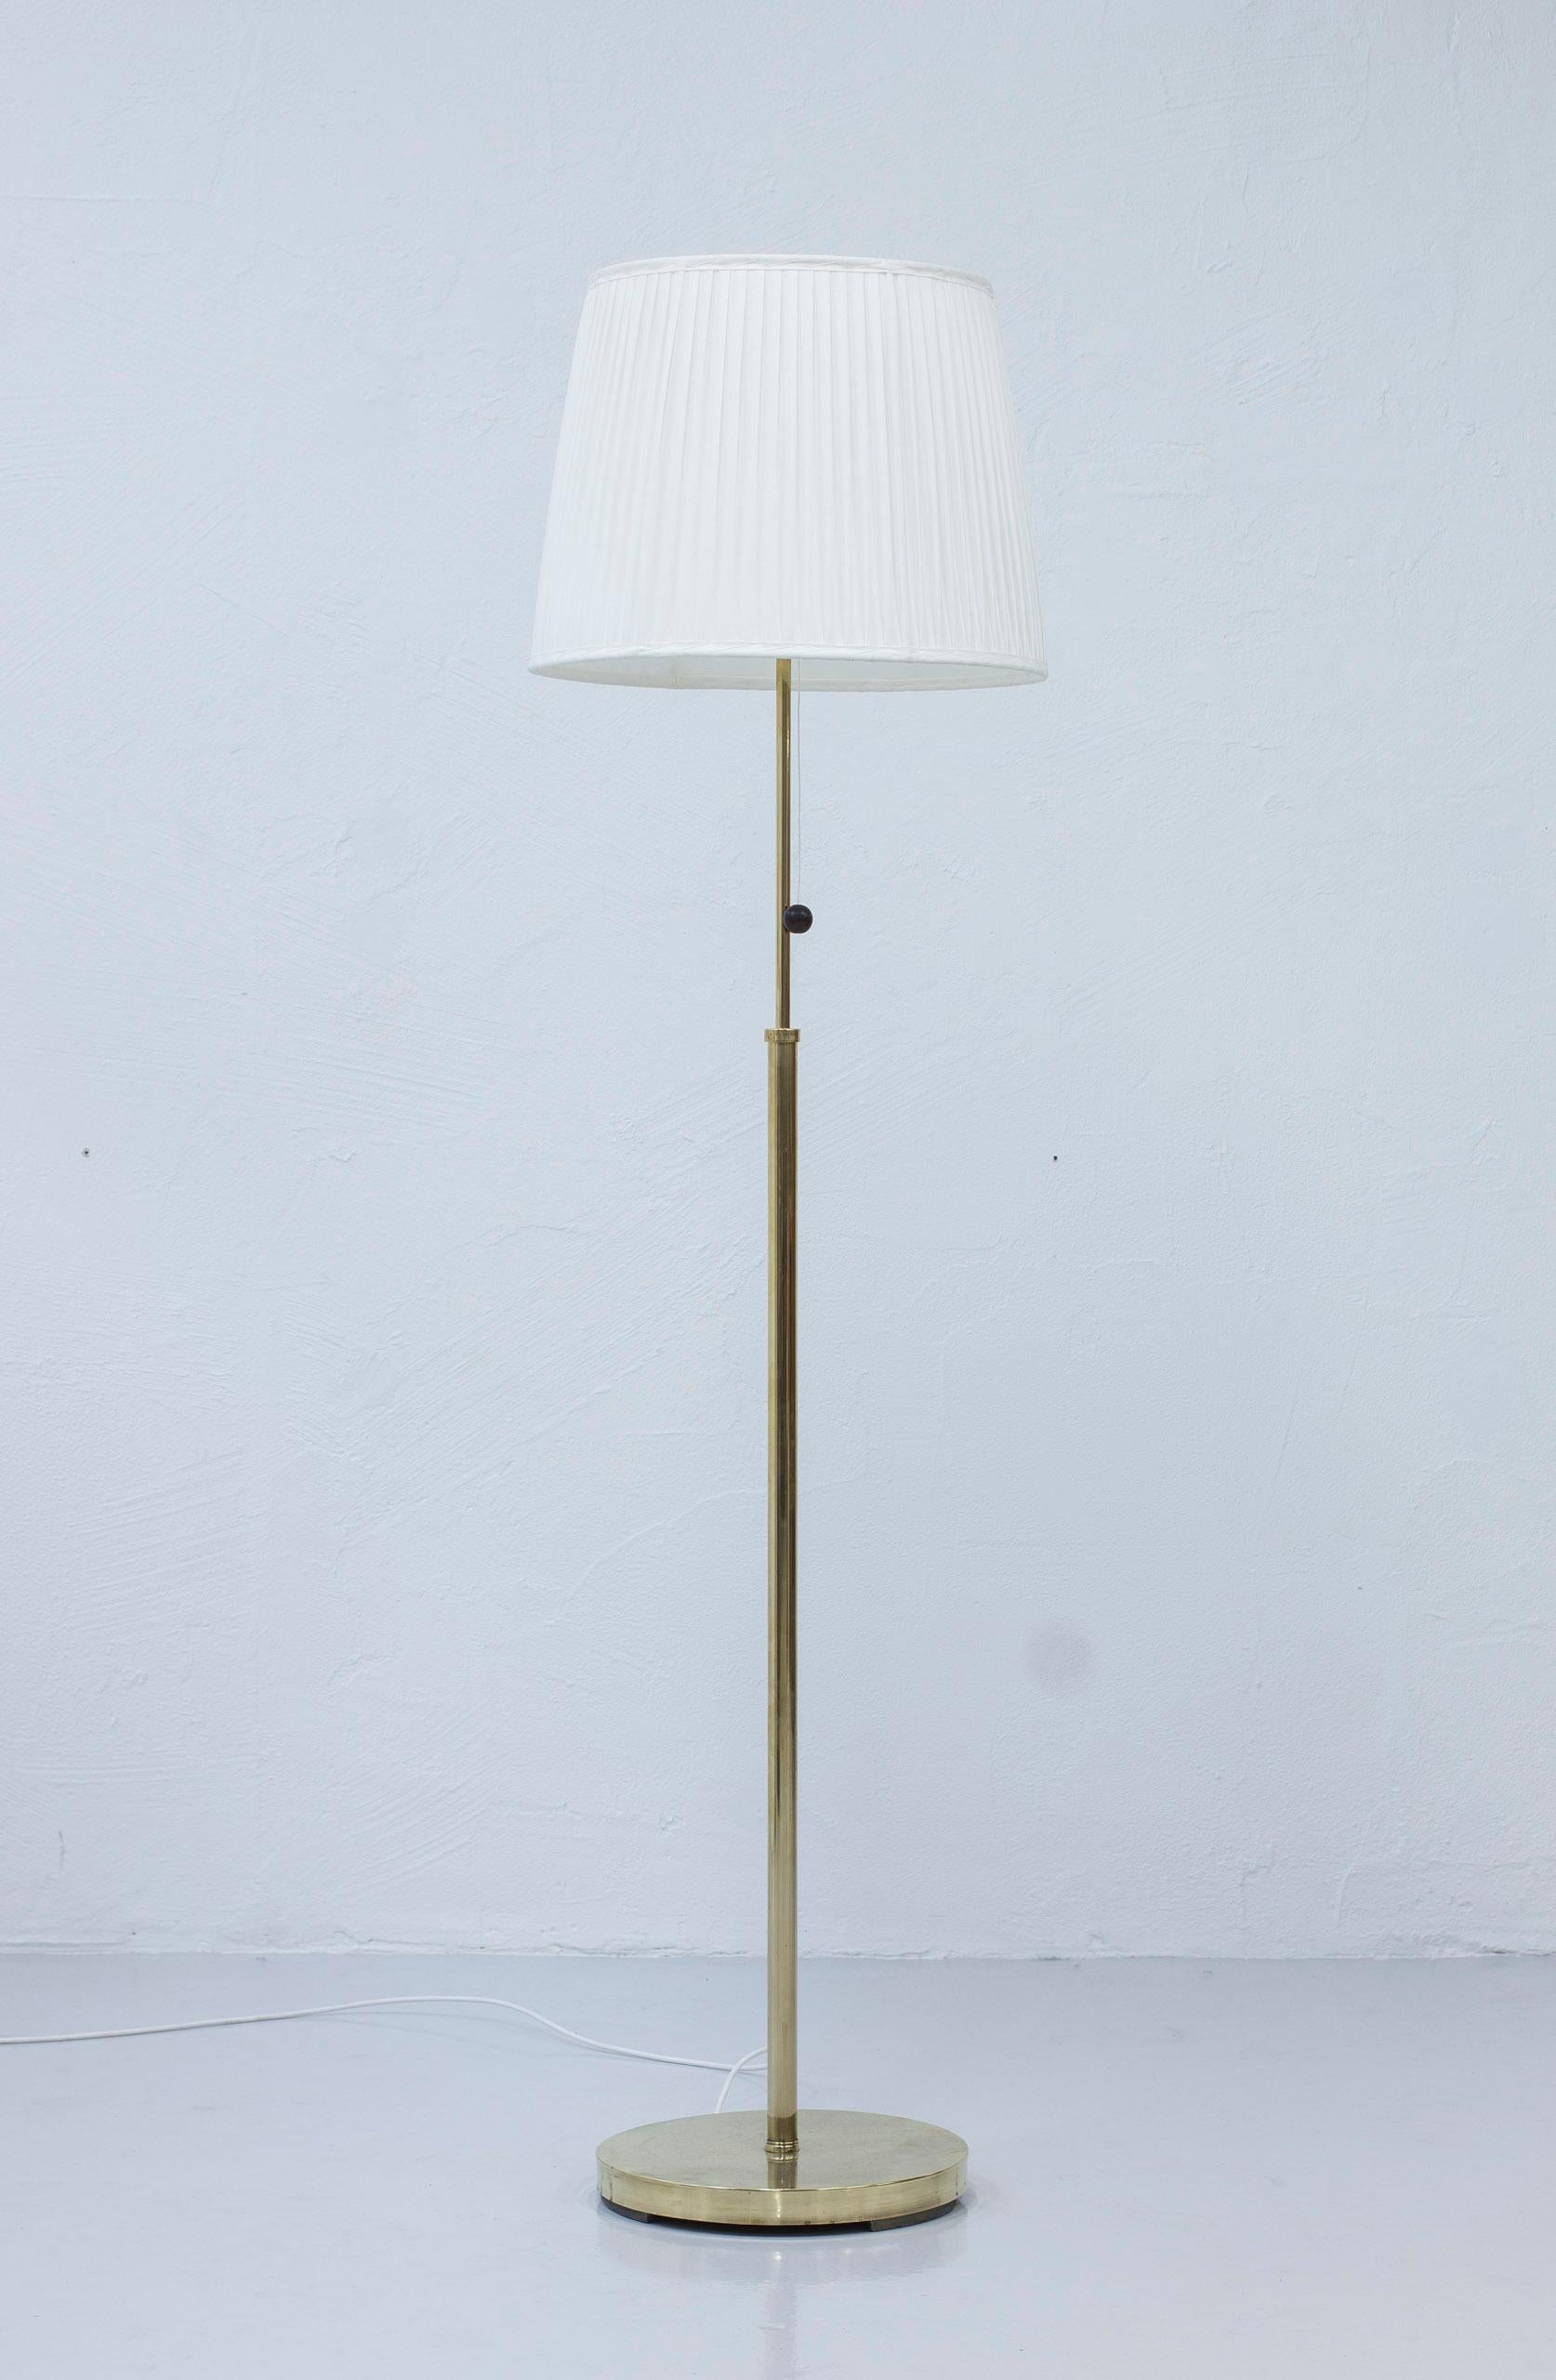 Swedish Modern floor lamp in the manner of Josef Frank, made during the 1940-50s. Polished brass and hand sewn, pleated lamp shade in off white chintz fabric. Chord light switch with rosewood ball as the pull handle. Very good vintage condition with